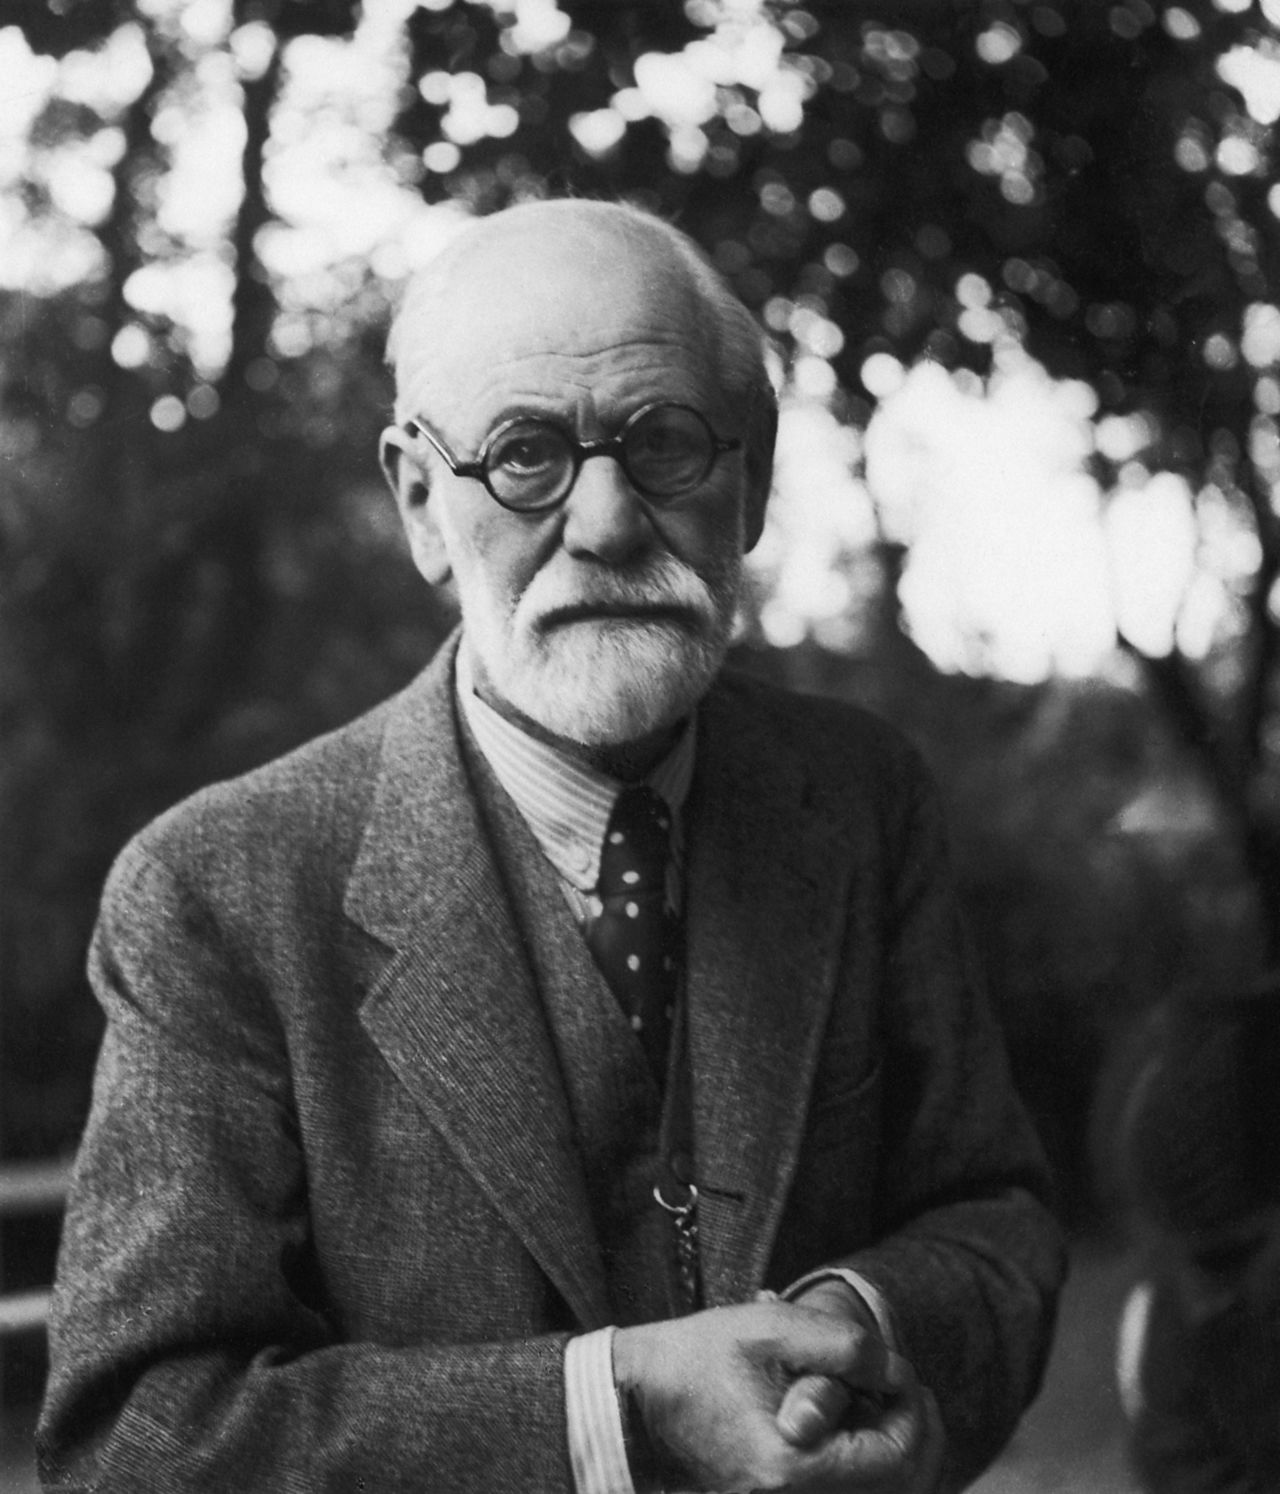 Psychiatrist Sigmund Freud died of an overdose of morphine, given to him by his doctor at his request. Freud had been fighting a malignant cancer of the mouth for years, which was finally deemed inoperable. He was 83.